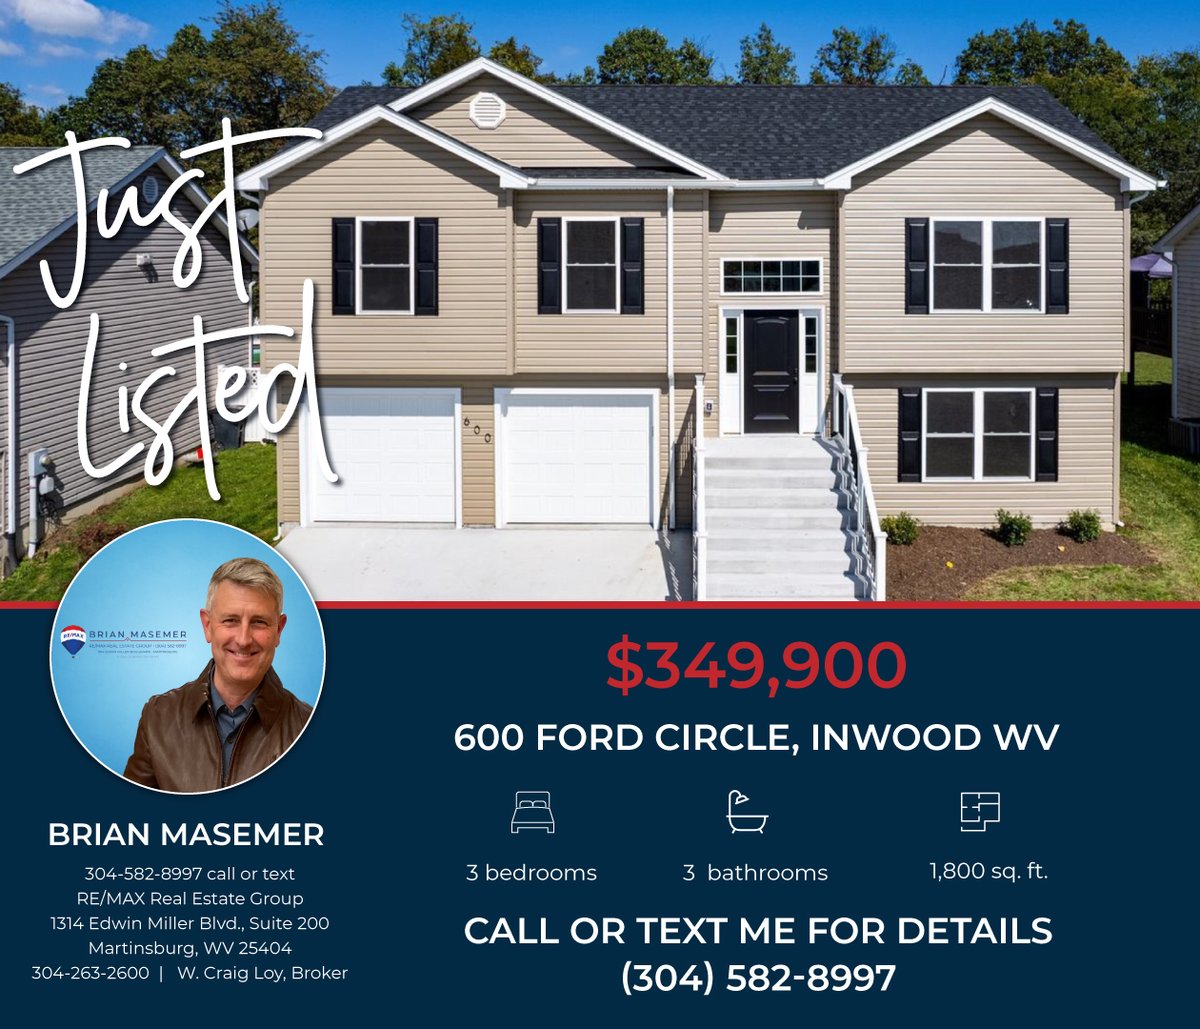 ‼️ JUST LISTED ‼️ South Berkeley County - Inwood, WV.

Brand new and 100% complete. 3 bedroom, 3 bath split foyer with a finished basement and 2-car garage. 

Photos & Details: zillow.com/homedetails/60…

#newlisting #berkeleycountywv #inwoodwv #remax